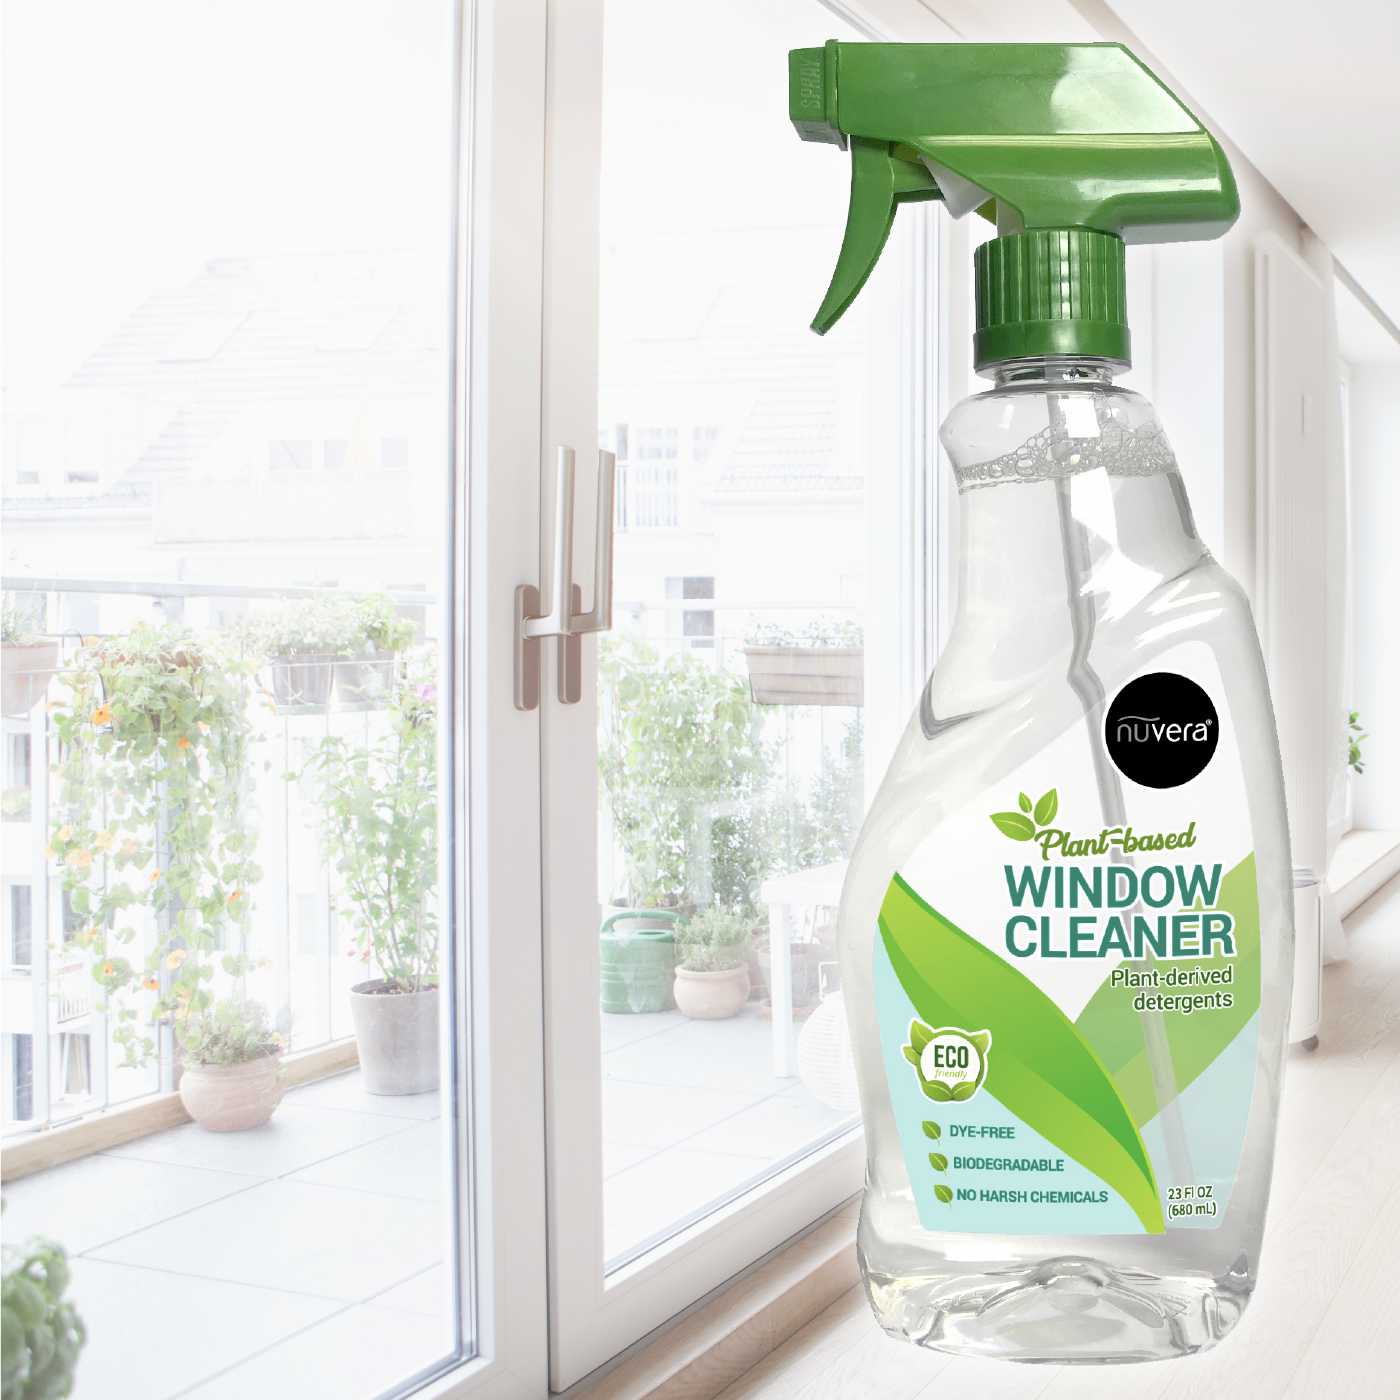 Nuvera Plant Based Window Cleaner